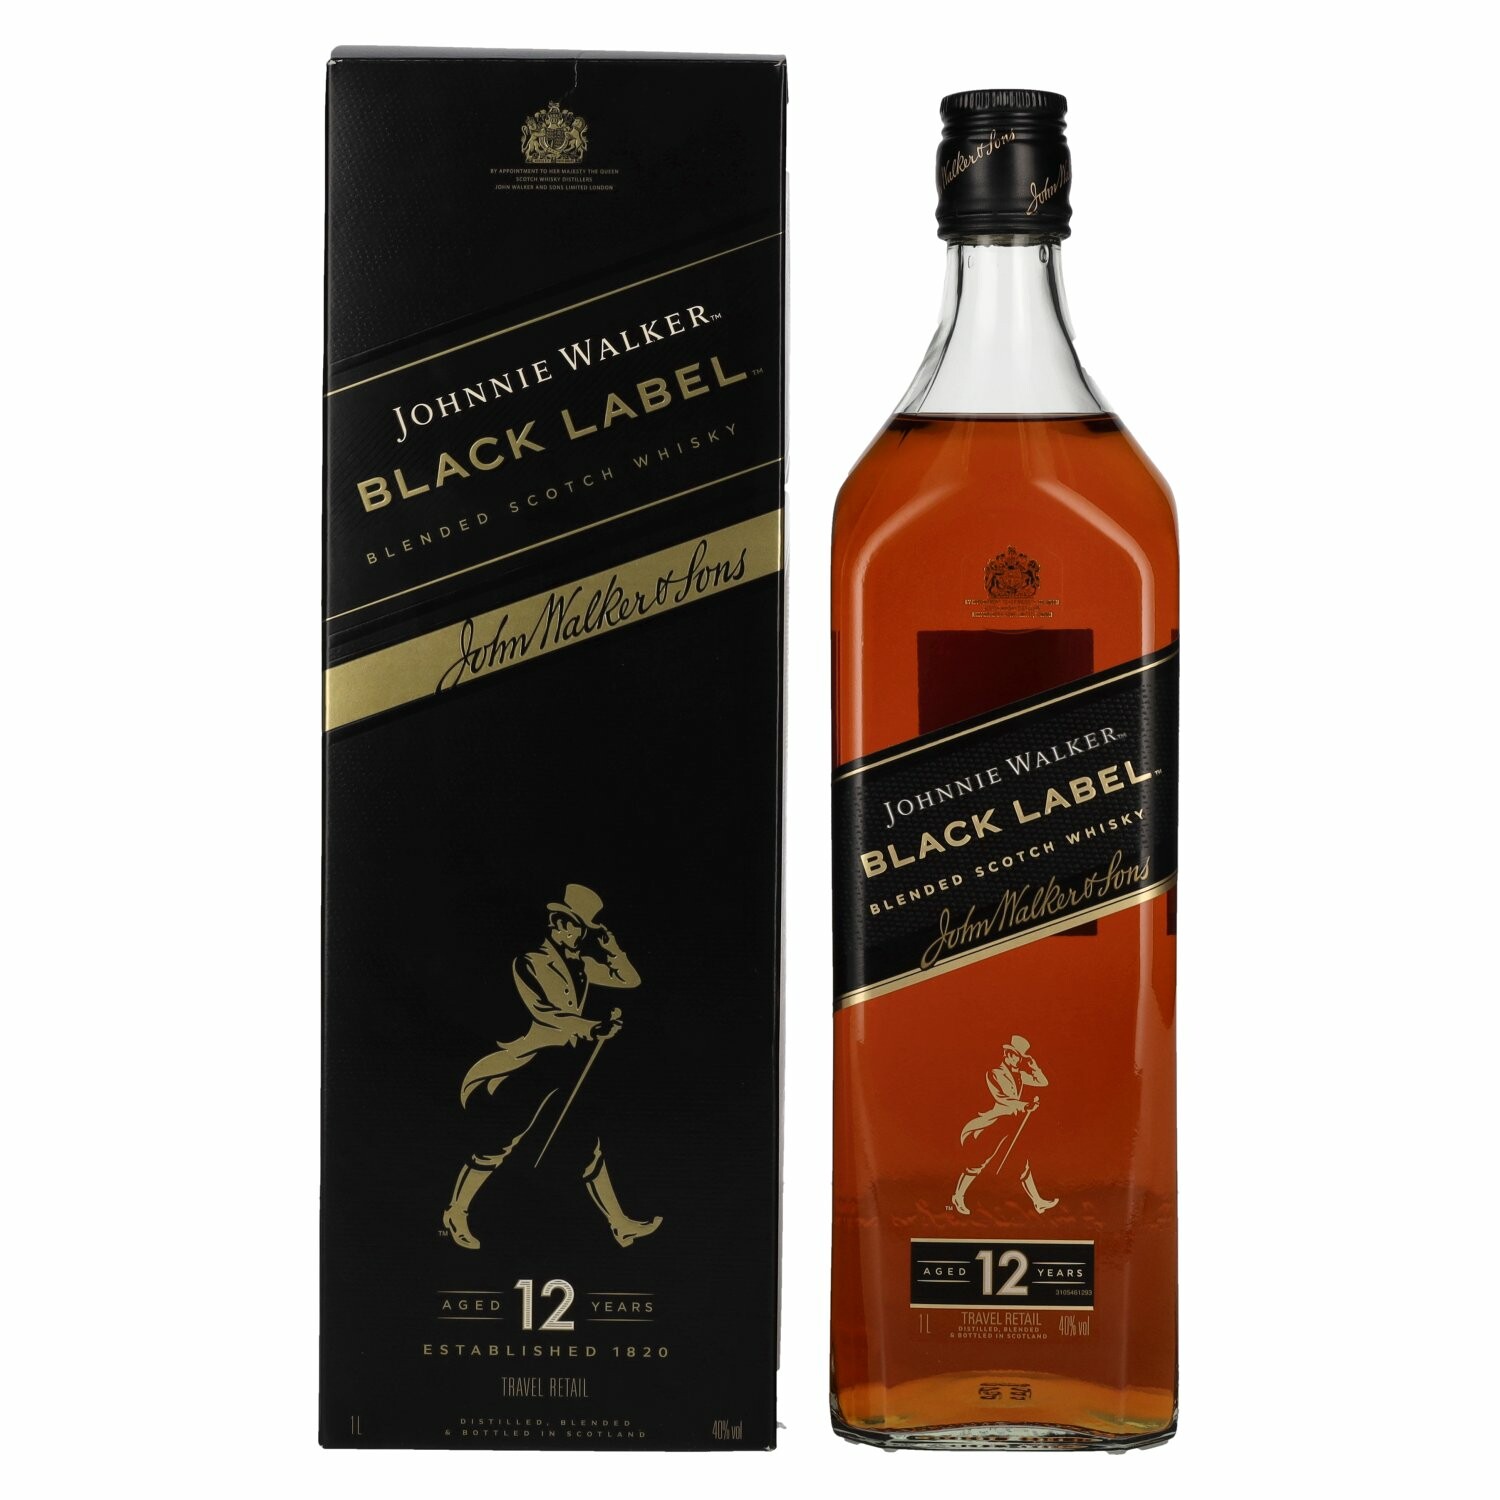 Johnnie Walker BLACK LABEL 12 Years Old Blended Scotch Whisky 40% Vol. 1l in Giftbox